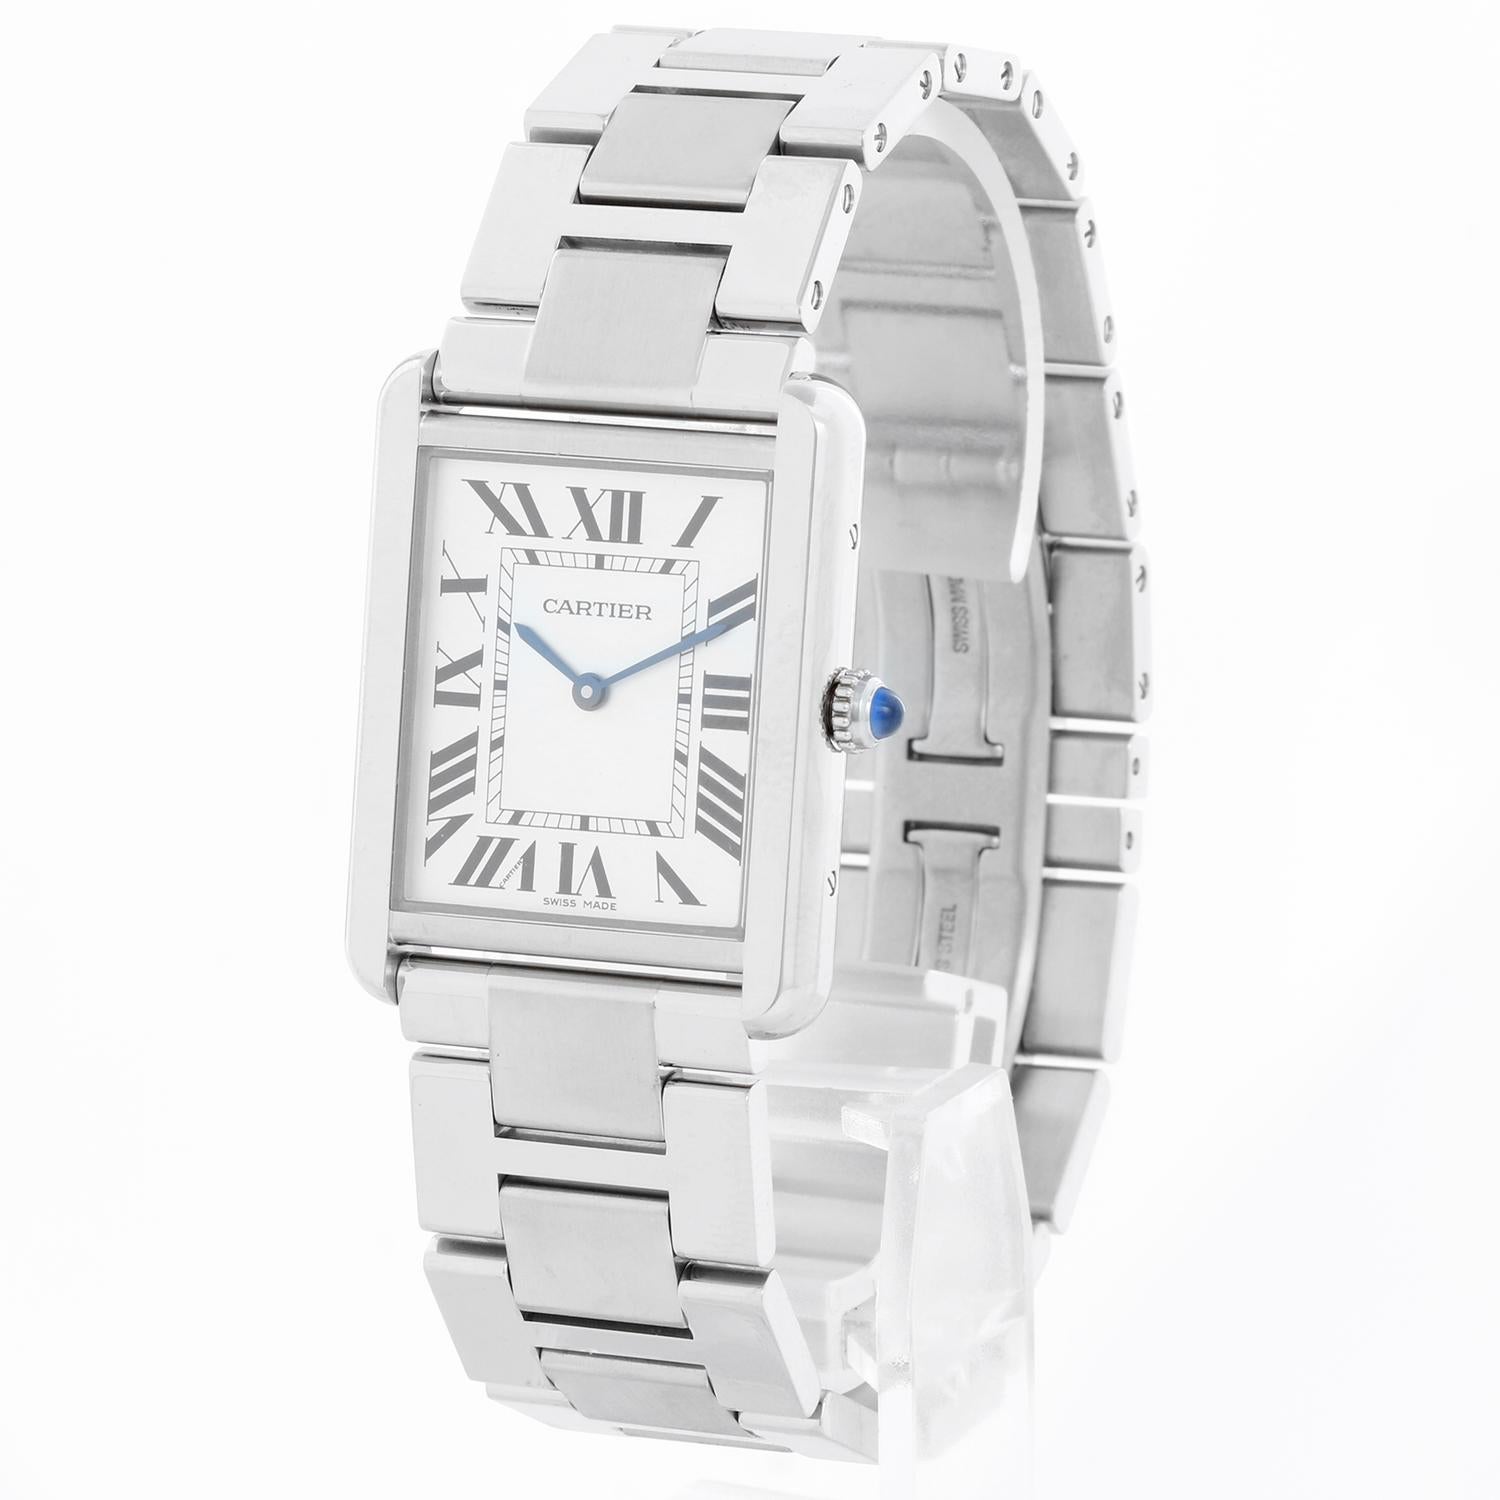 Cartier Tank Solo Stainless Steel W5200014 3169 - Quartz. Stainless steel  (27 x 34mm). Silver dial with black Roman numerals. Stainless Steel Cartier bracelet; fit 7 1/2